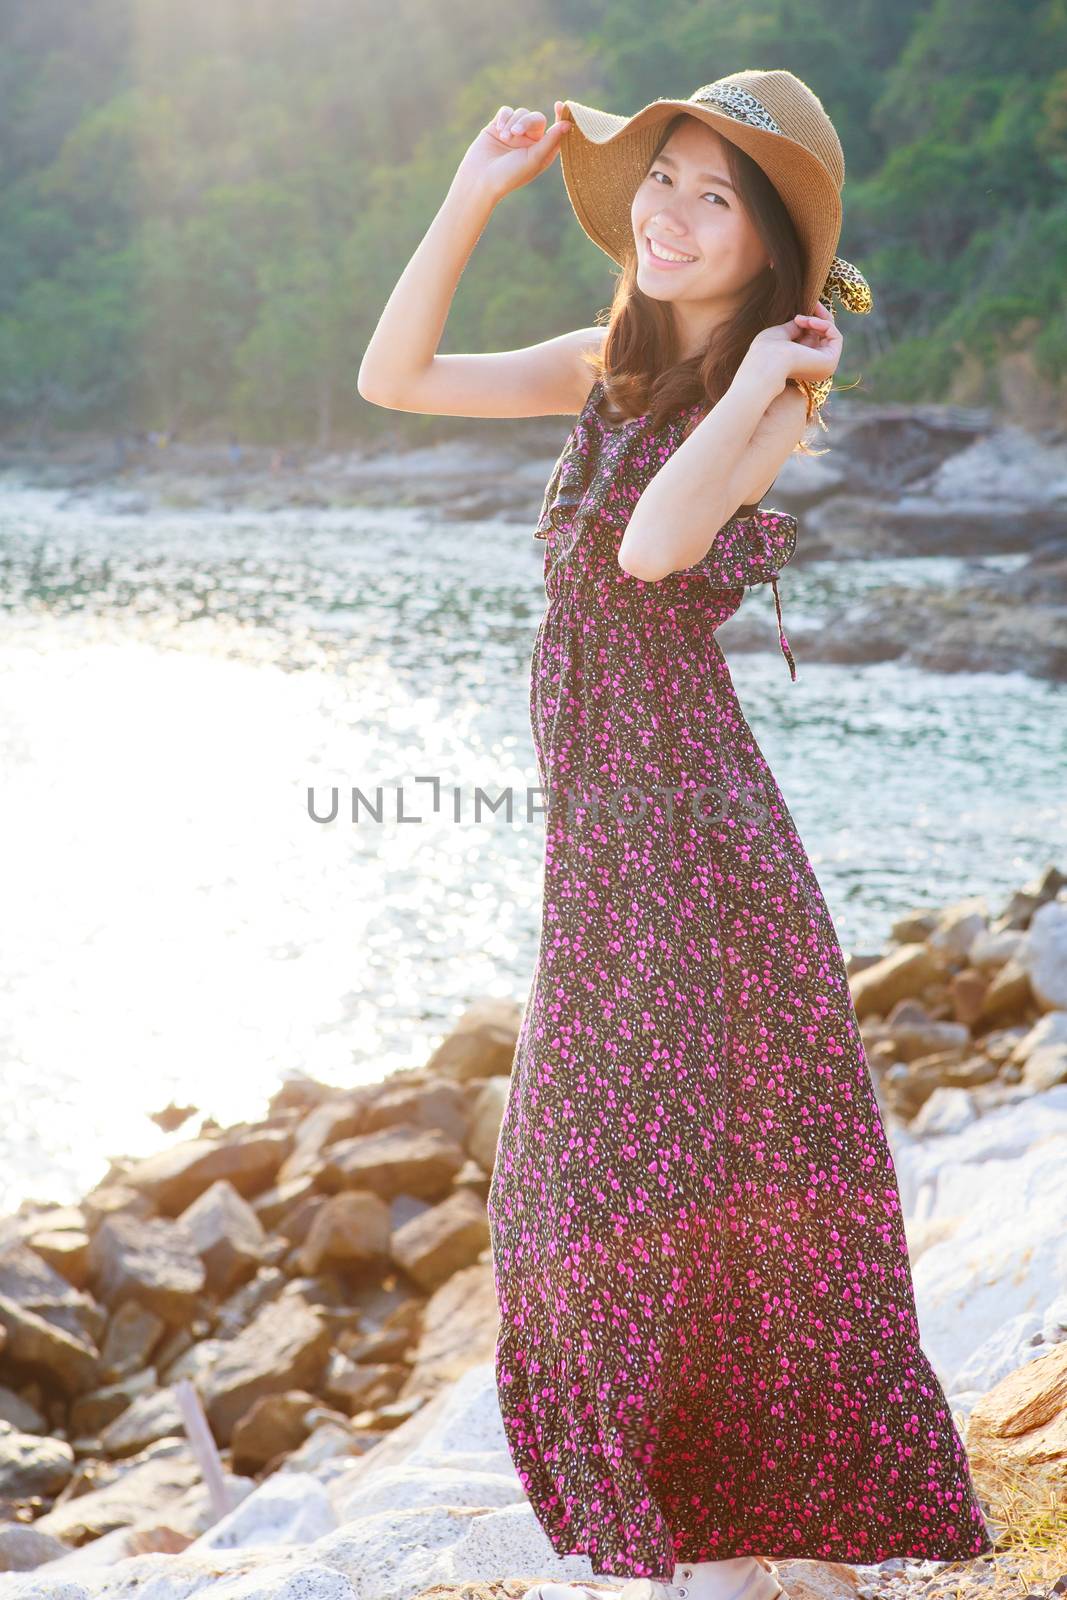 portrait of beautiful woman wearing straw hat and long dress standing beside sea beach smiling with happiness emotion use for people relax in vacation destination